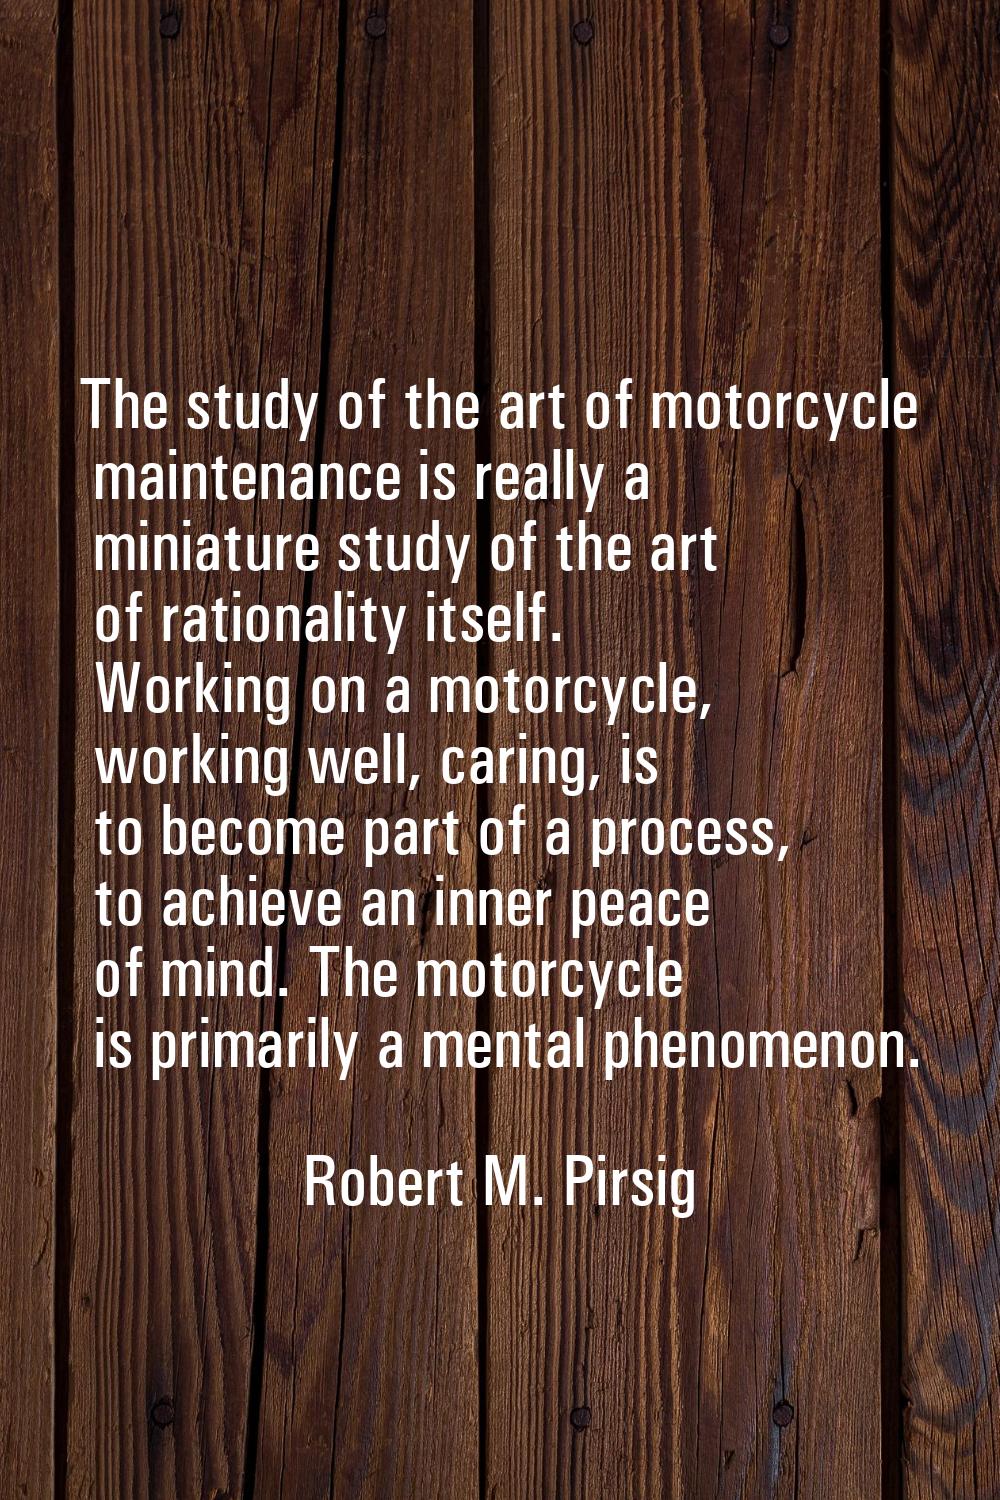 The study of the art of motorcycle maintenance is really a miniature study of the art of rationalit